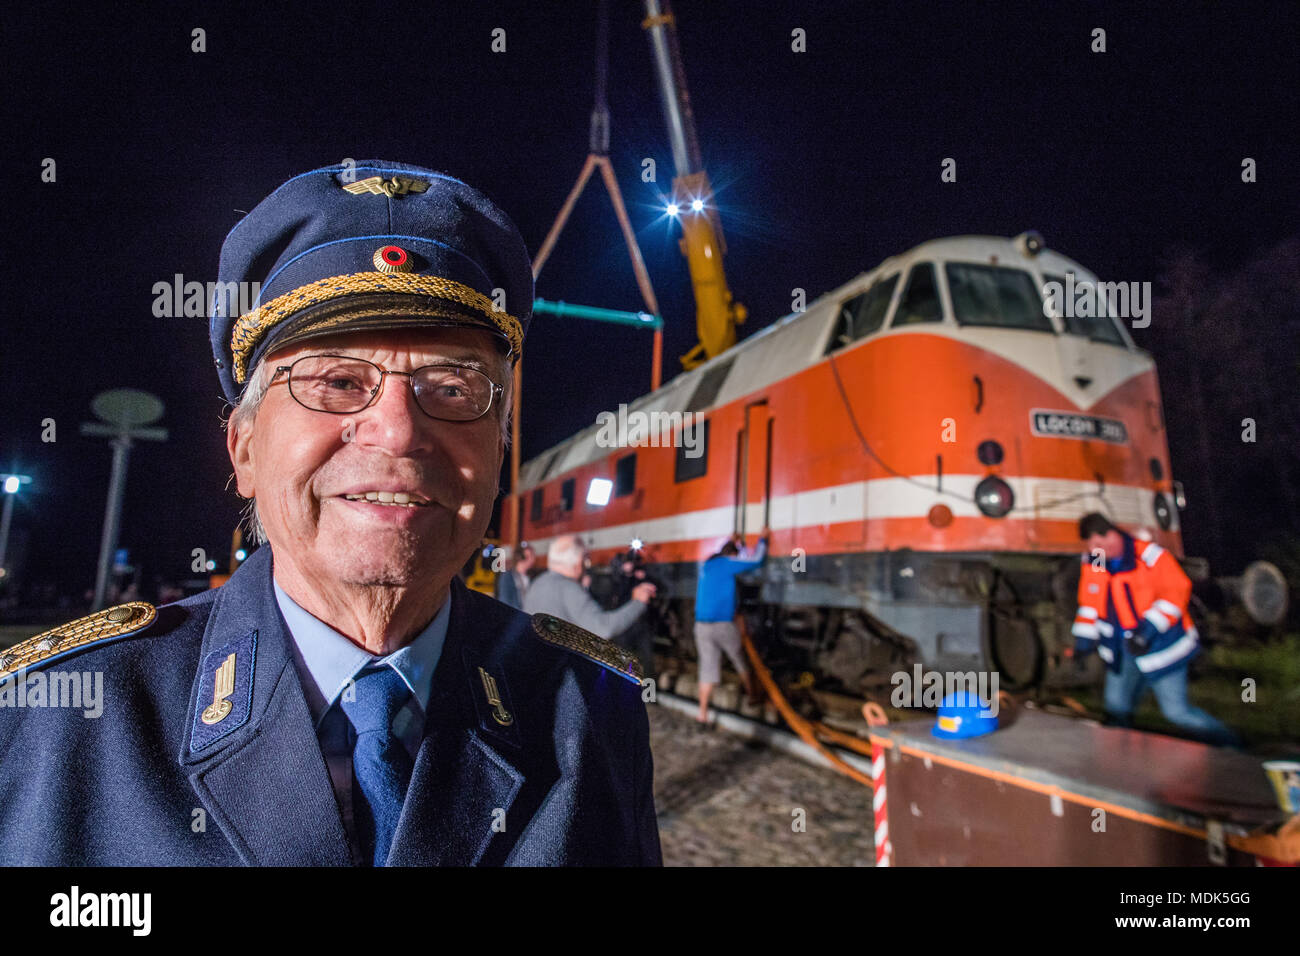 19 April 2018, Germany, Gadebusch: Locomotive driver Peter Falow smiles in his old Reichsbahn uniform as two cranes lift a 78 tonne diesel locomotive of the model V-180 into the railway museum outside the local train station. The so-called 'cigar' locomotive was built in 1967. Photo: Jens Büttner/dpa-Zentralbild/dpa Stock Photo